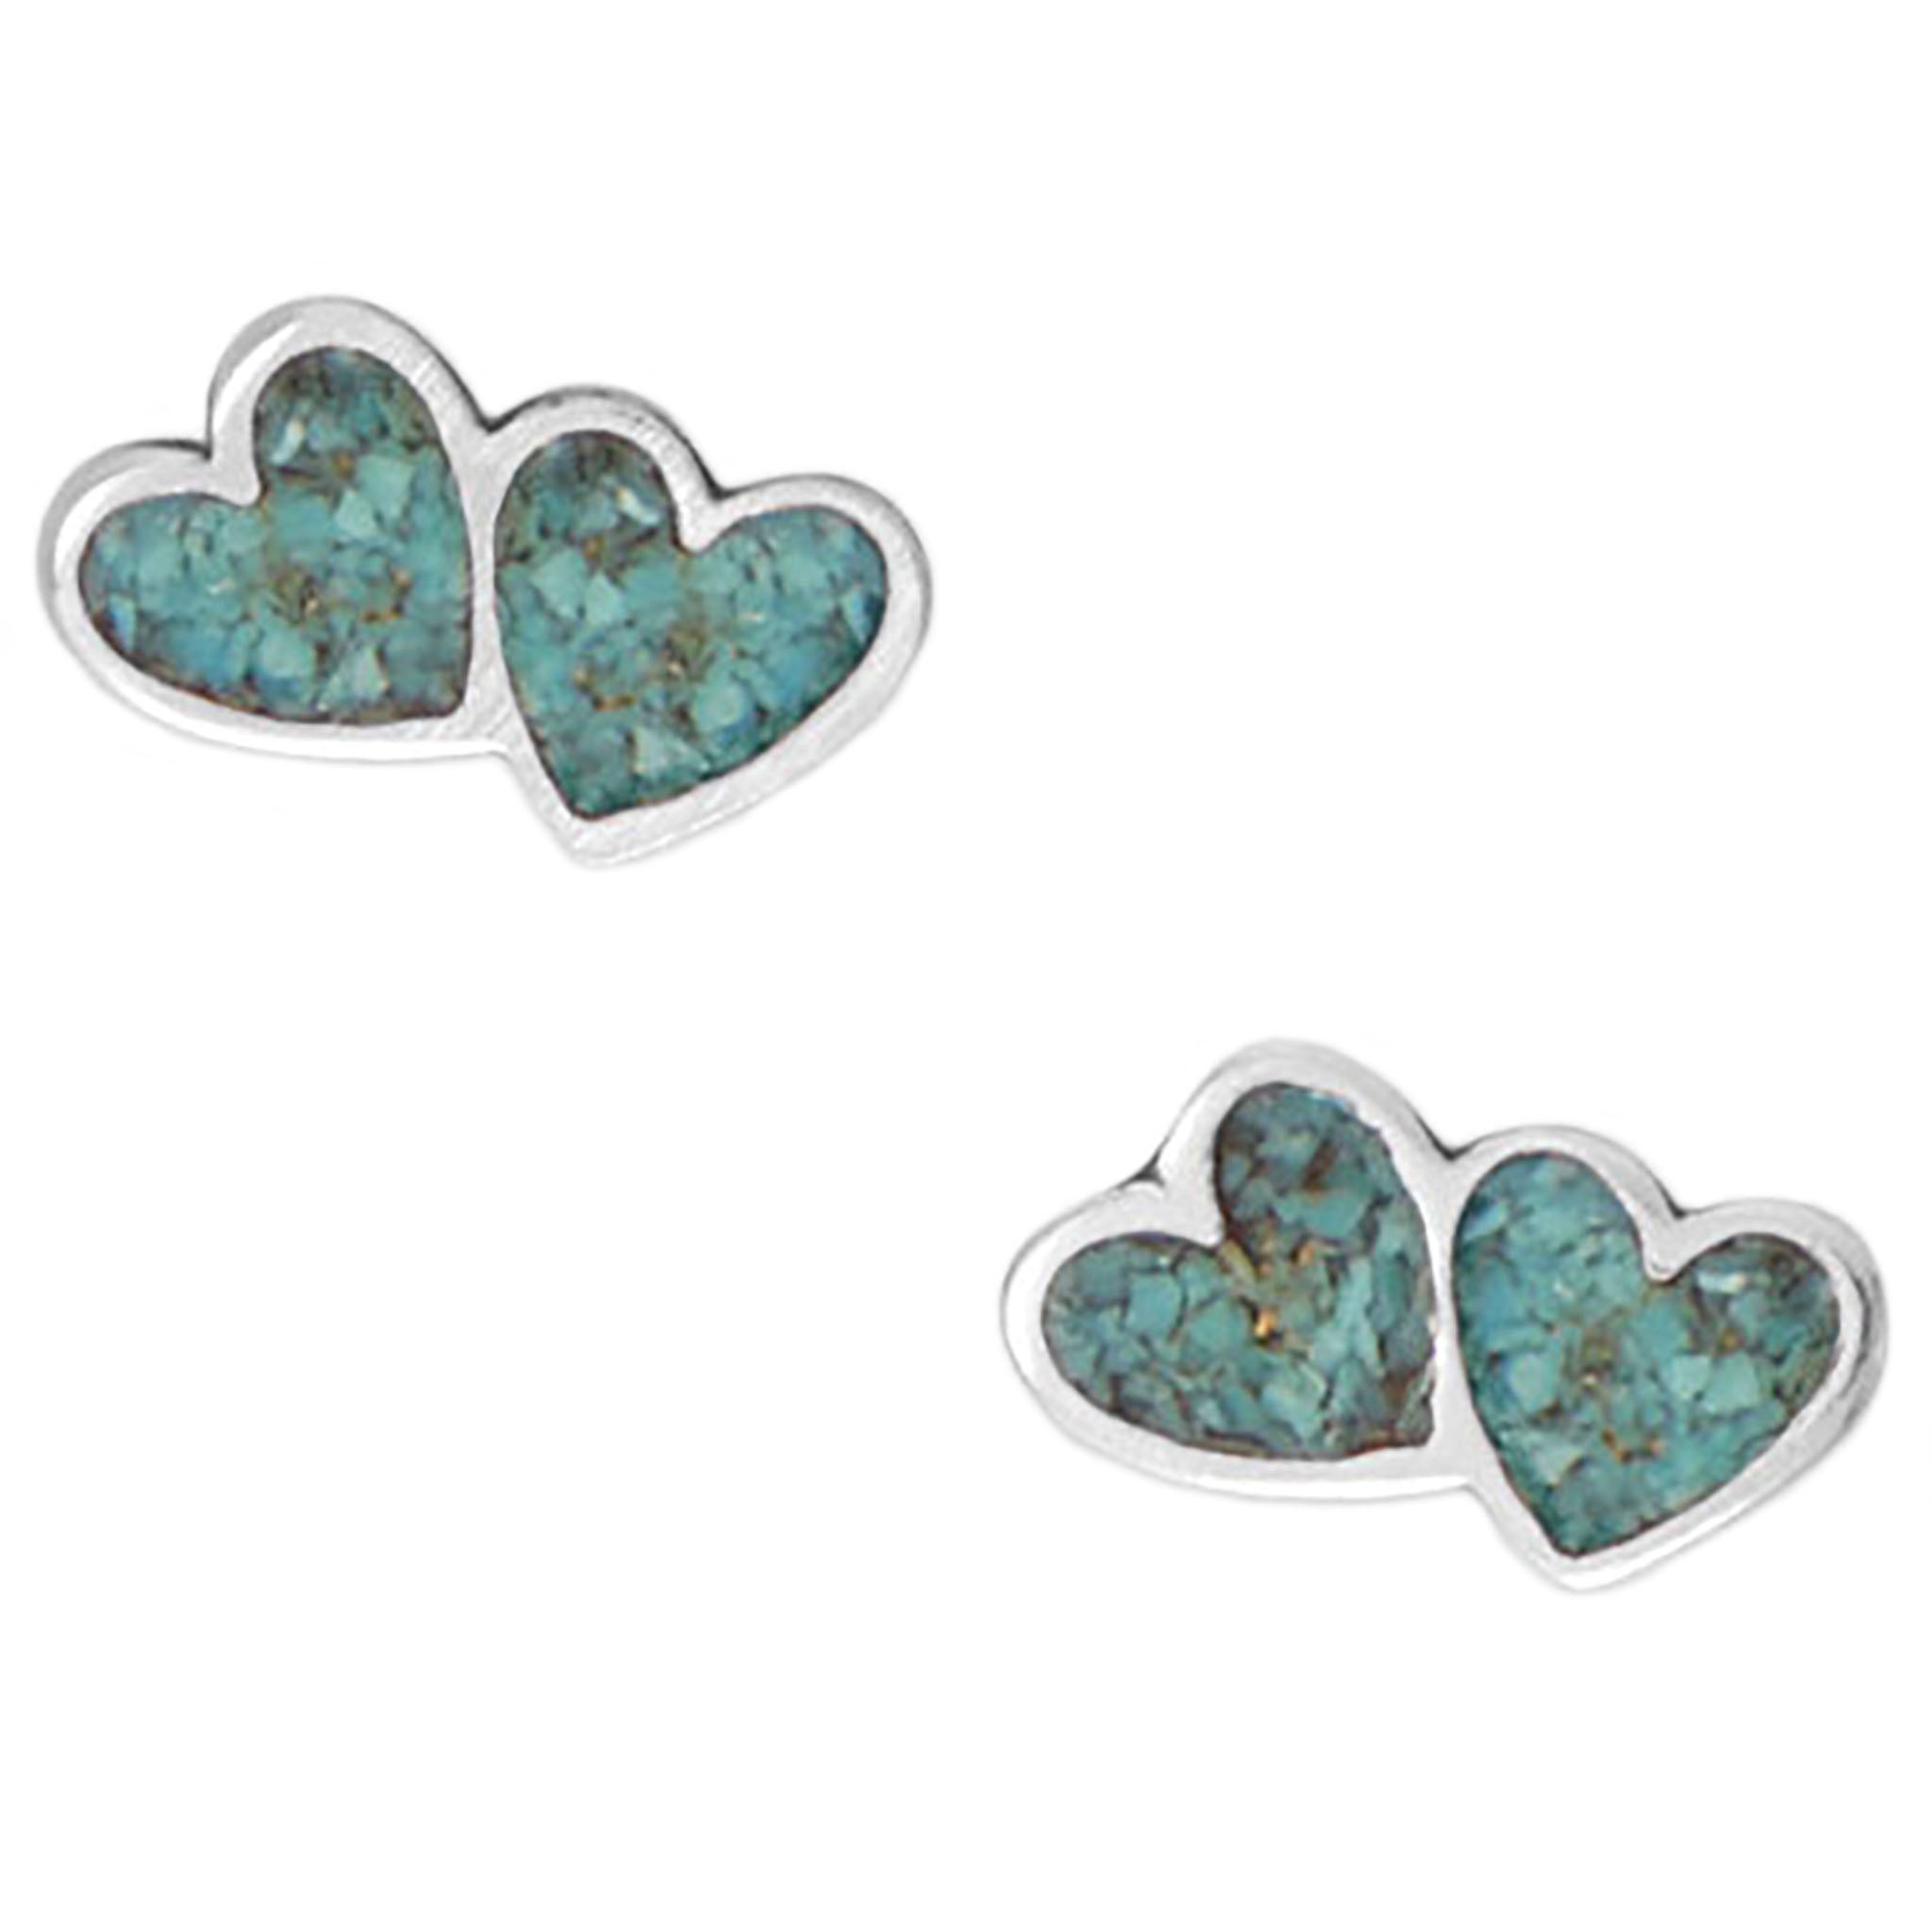 Turquoise Chip Double Heart Earrings